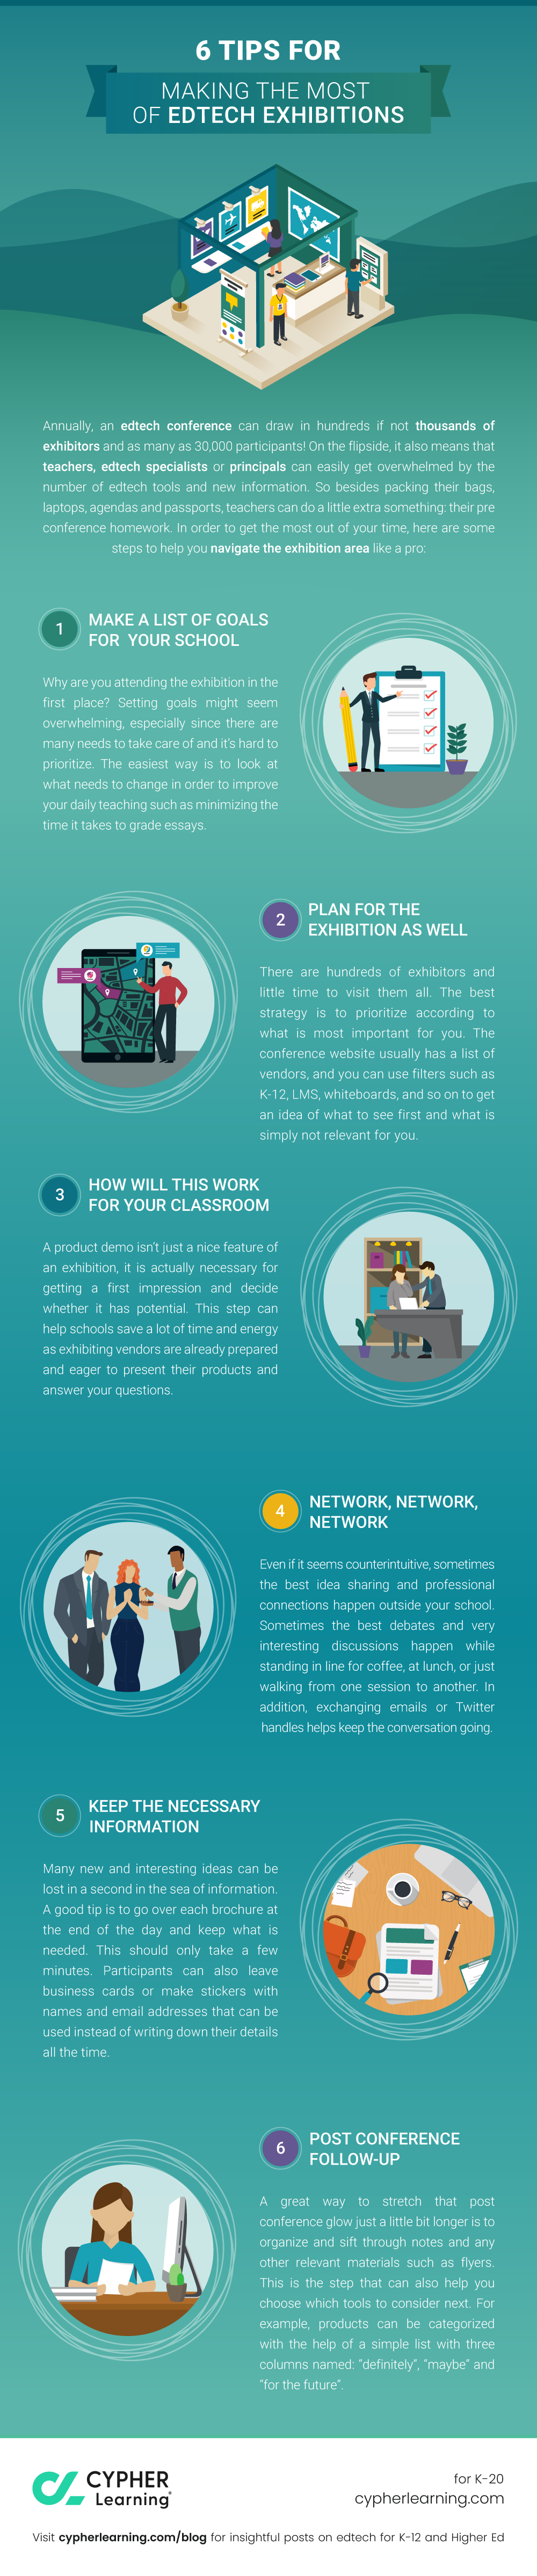 6 Tips for making the most of edtech exhibitions